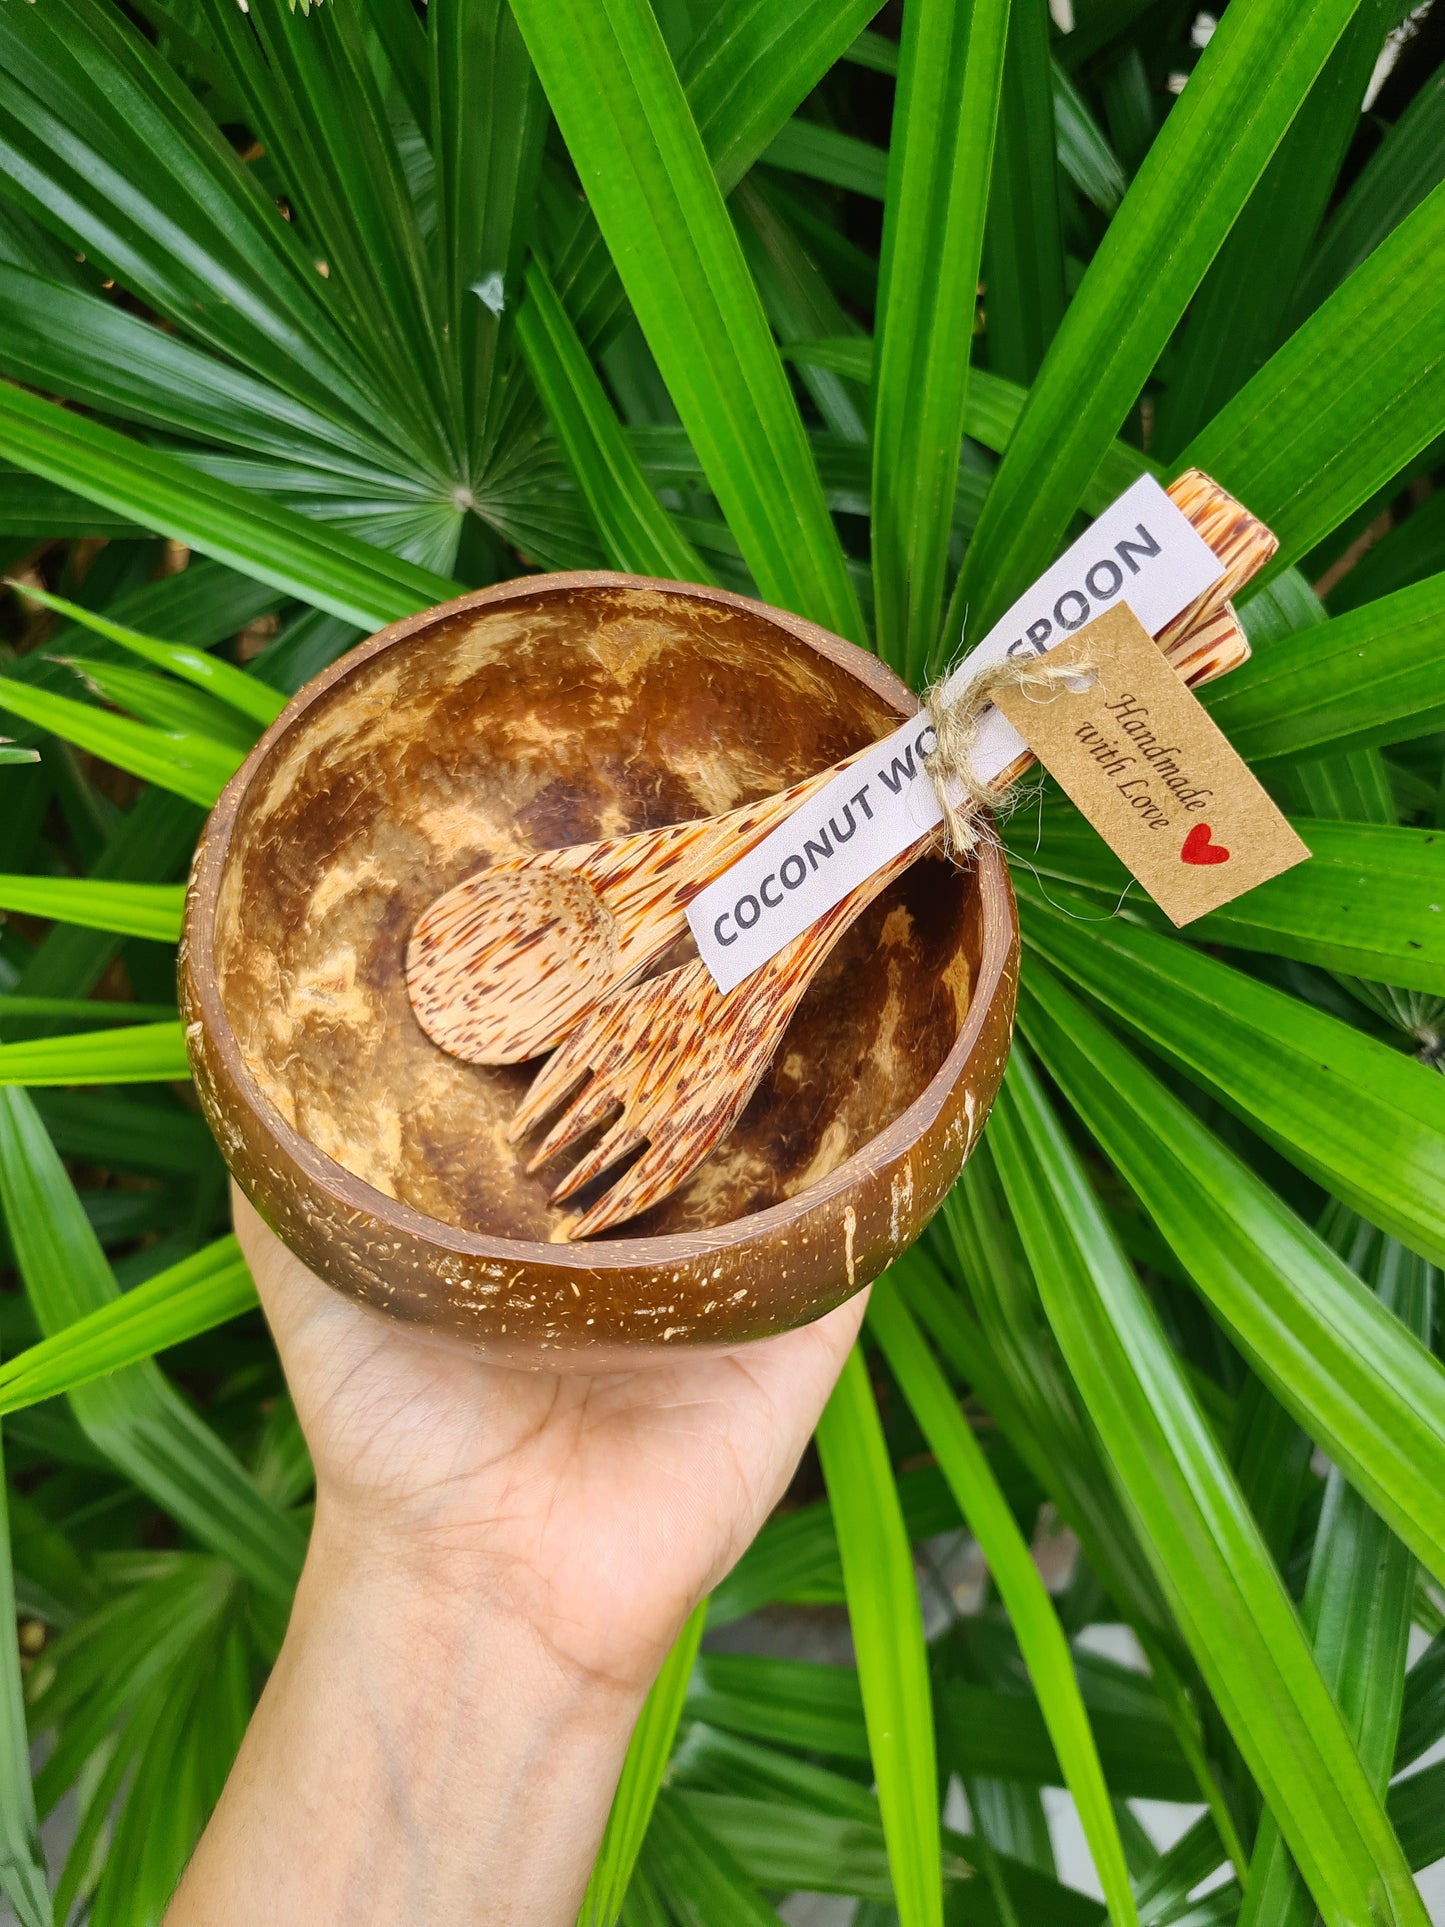 Thenga Coconut wood Spoon & Fork (2 Spoon + 2 Fork) | Eco Friendly, Natural & Handmade